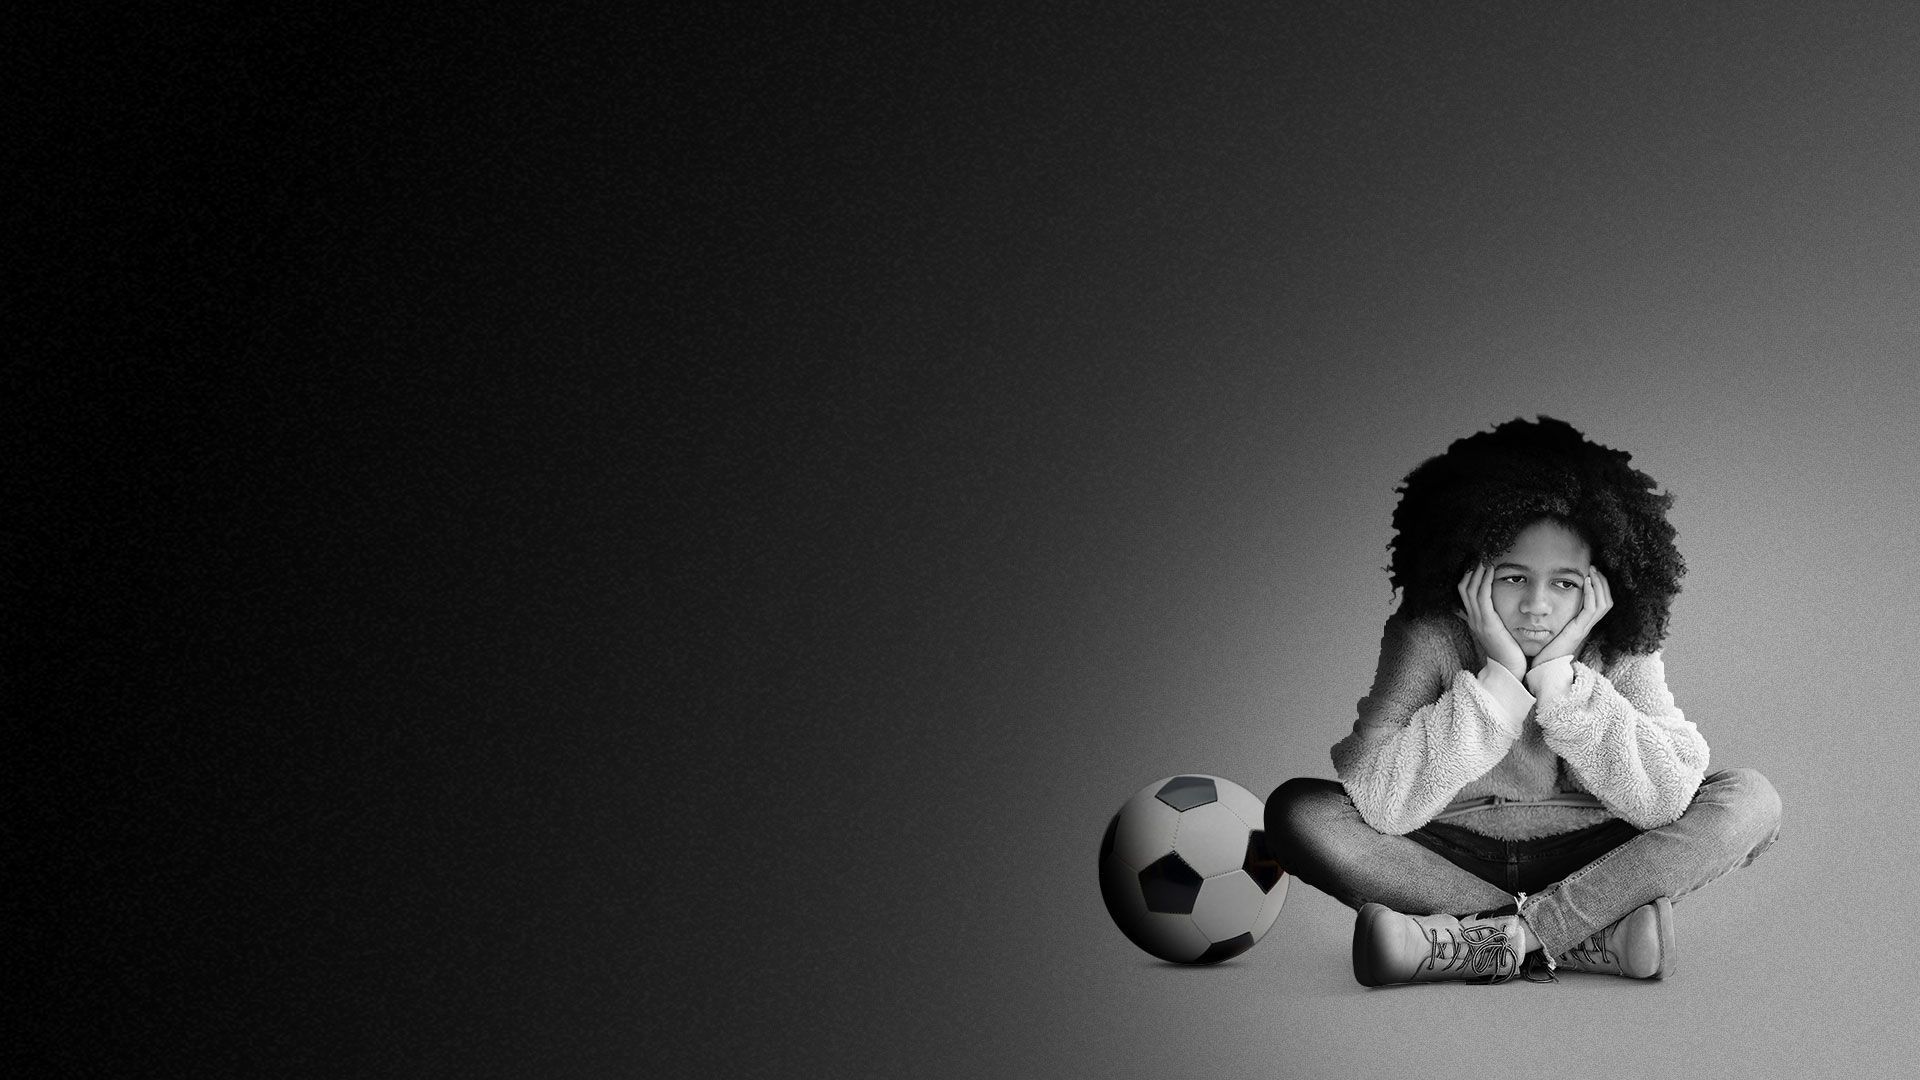 Illustration of a child looking forlorn with an abandoned soccer ball in the background